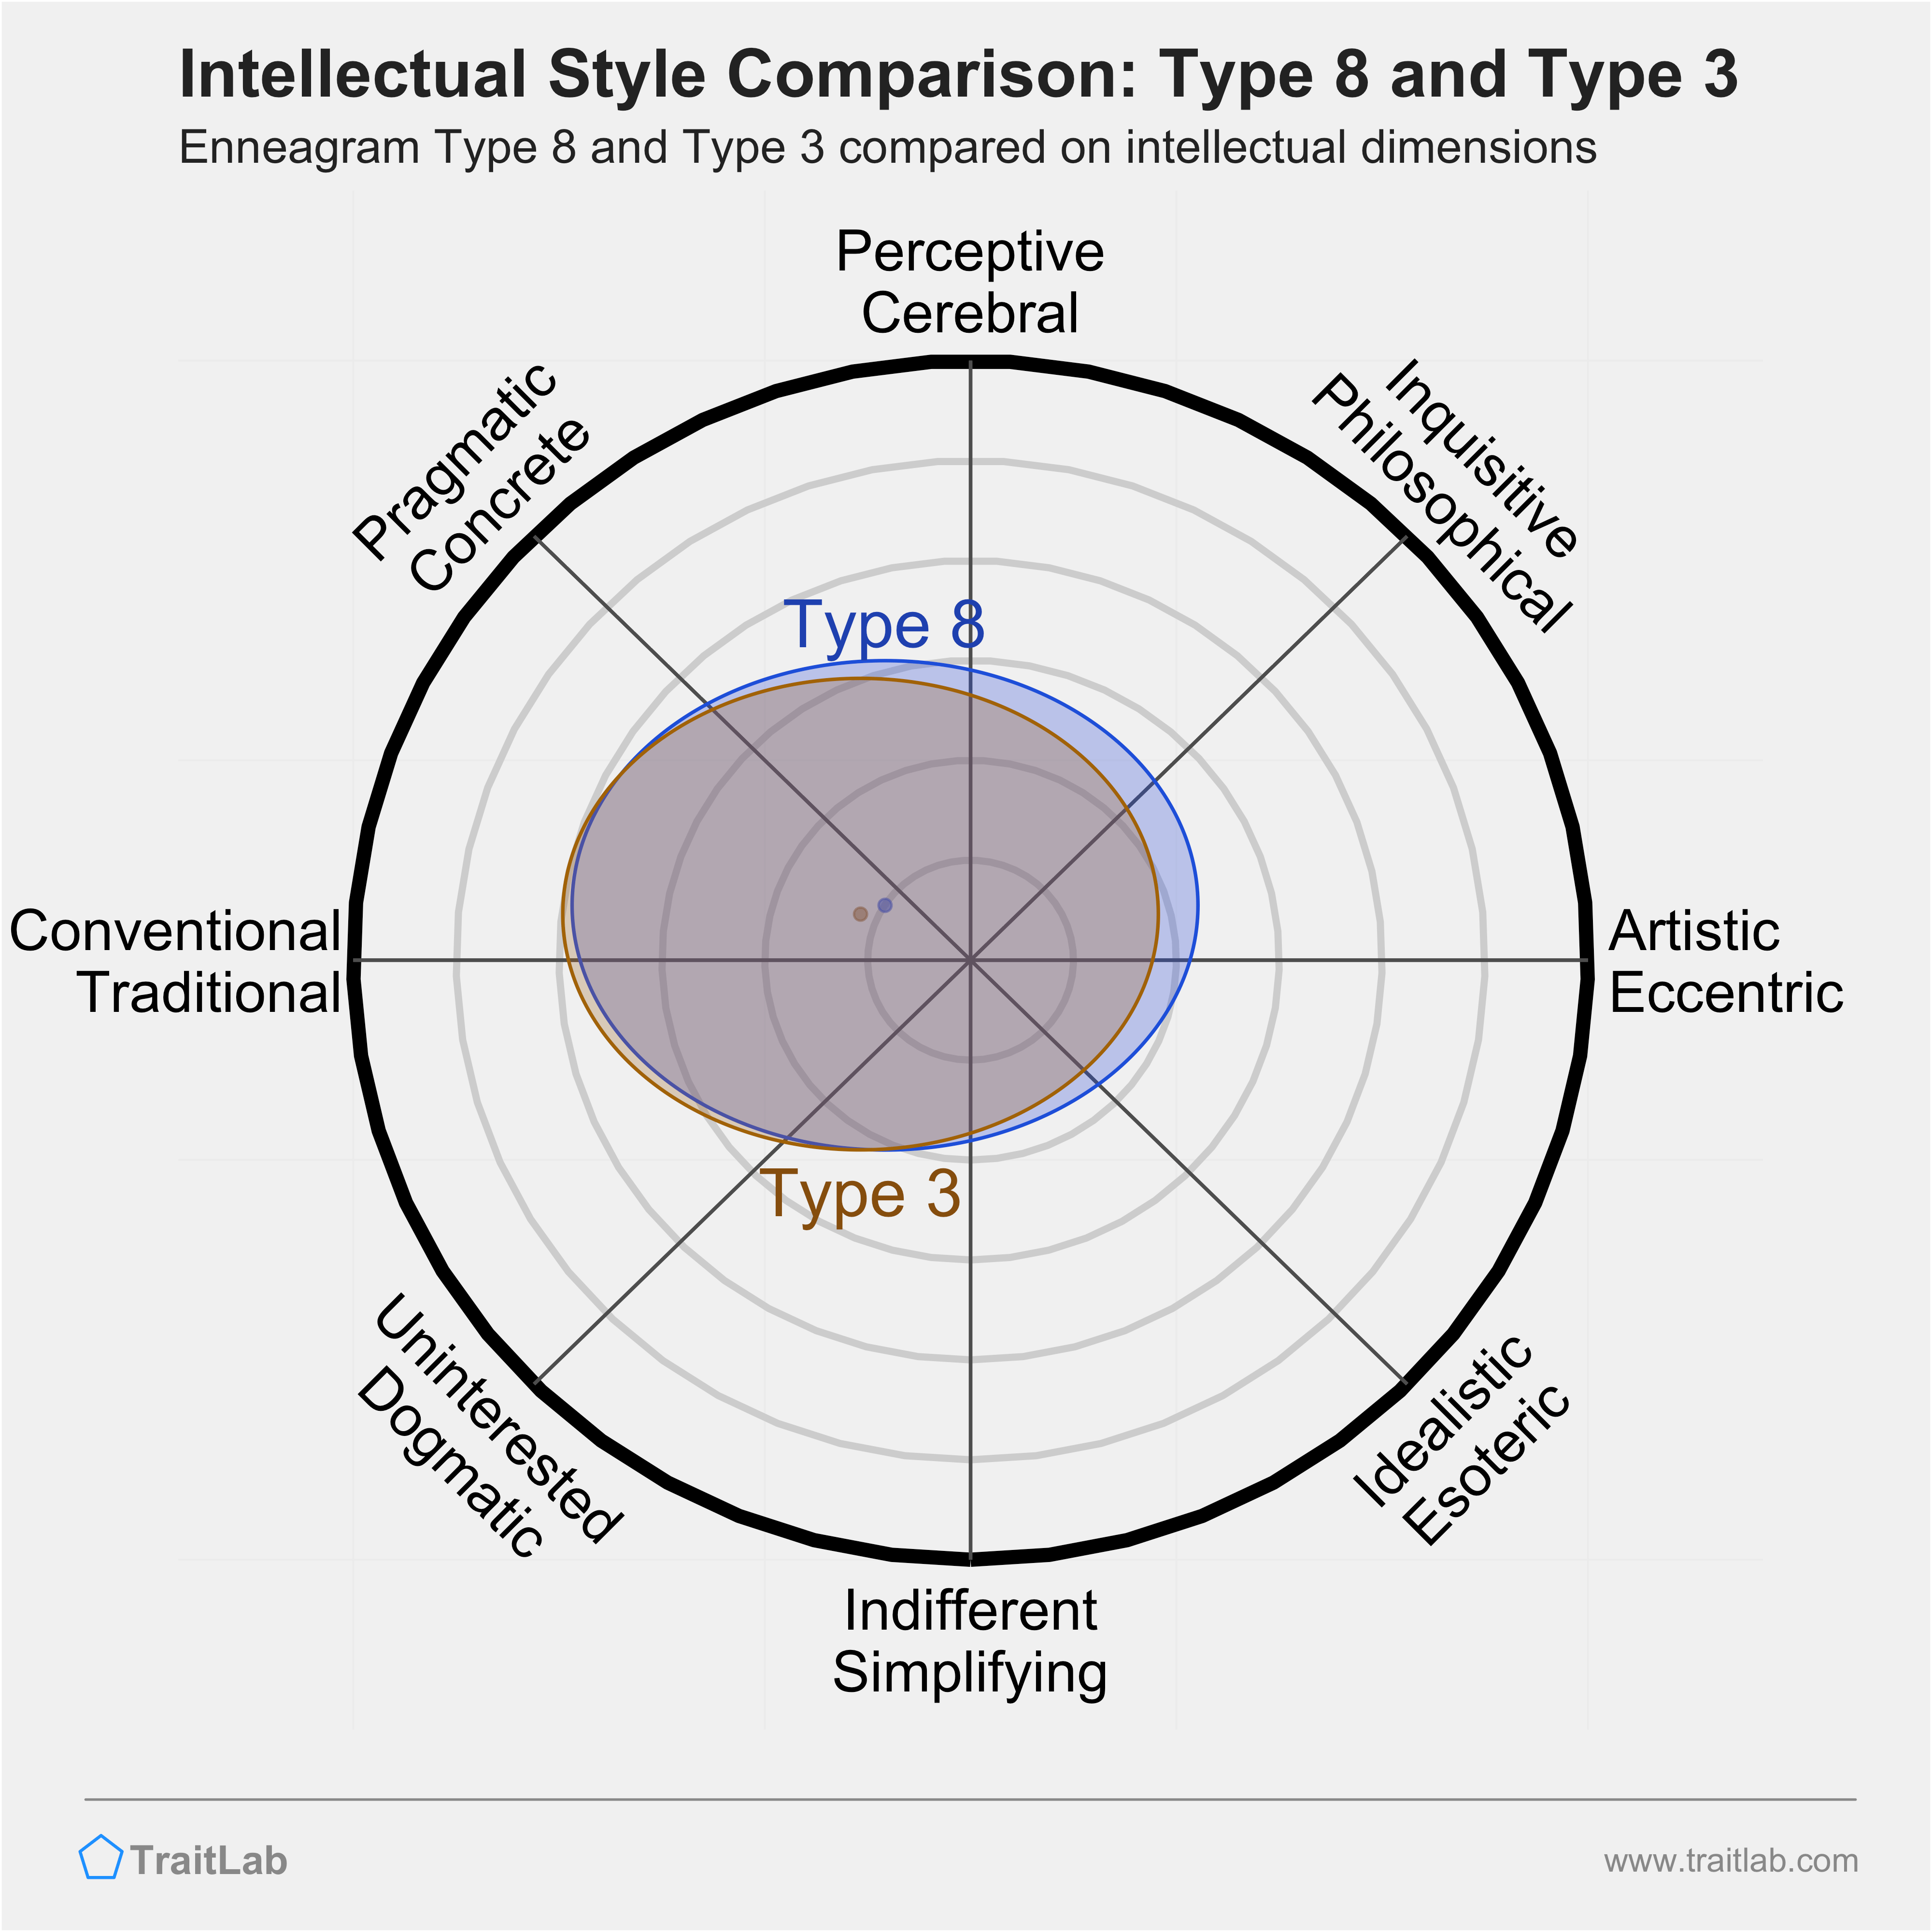 Type 8 and Type 3 comparison across intellectual dimensions